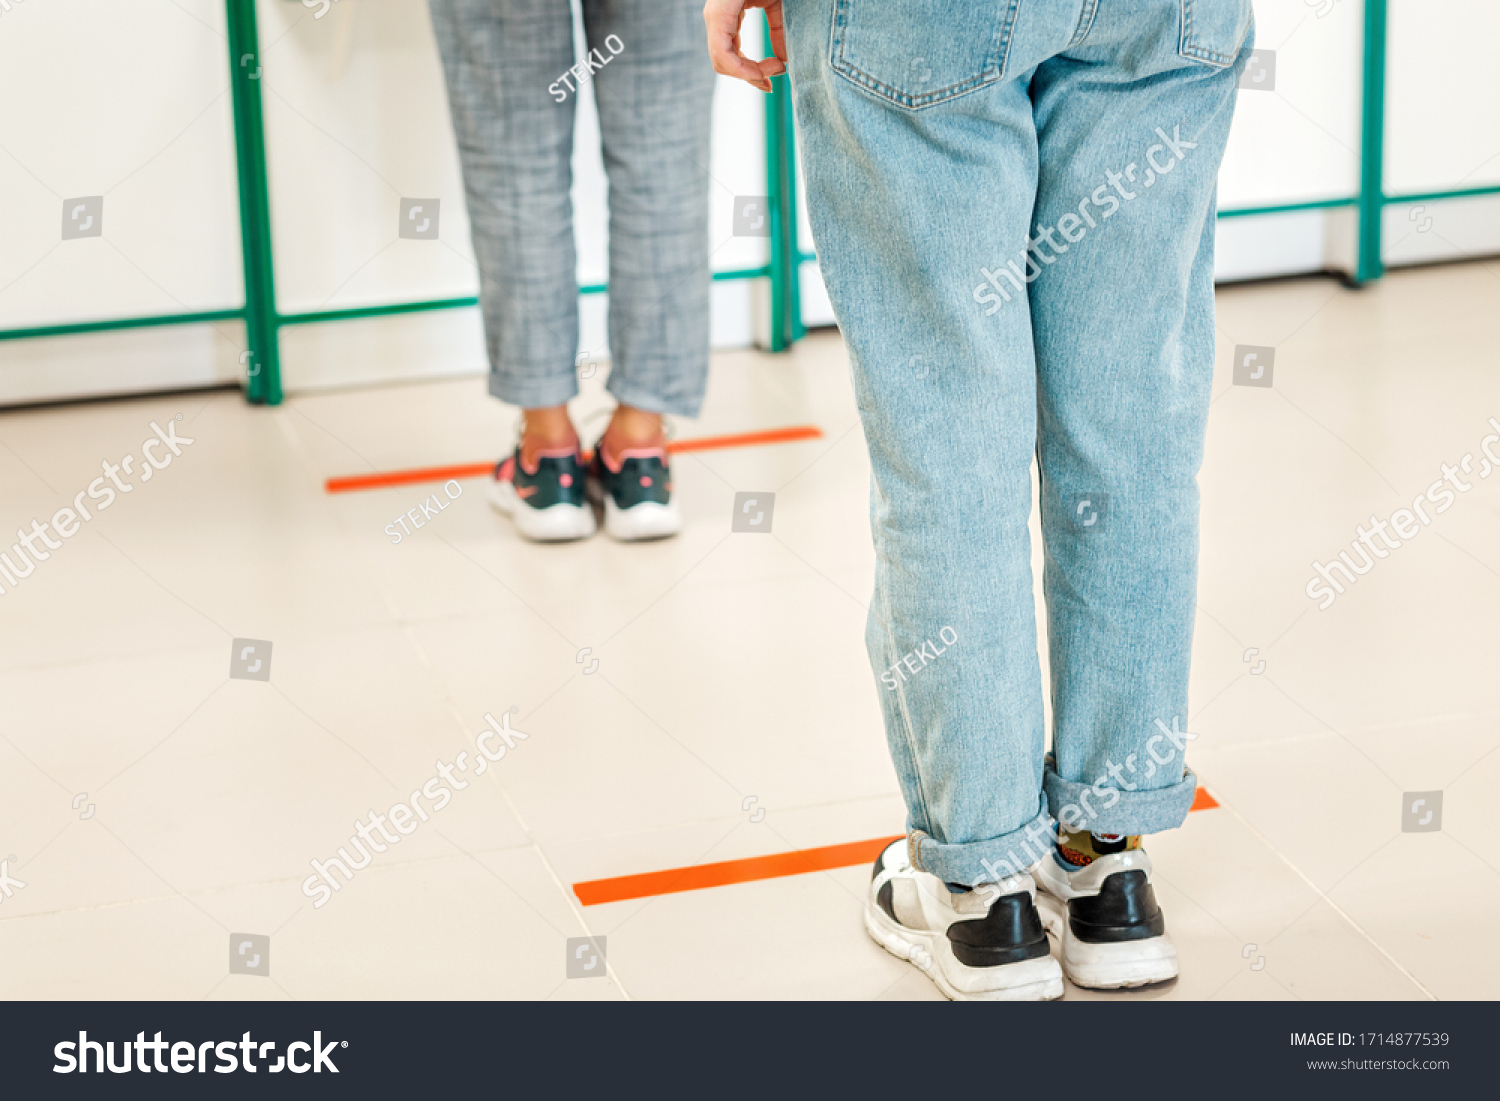 People stand in line, legs close-up. Attention line on the floor of the store to maintain social distance. Concept of the coronavirus pandemic and prevention measures #1714877539